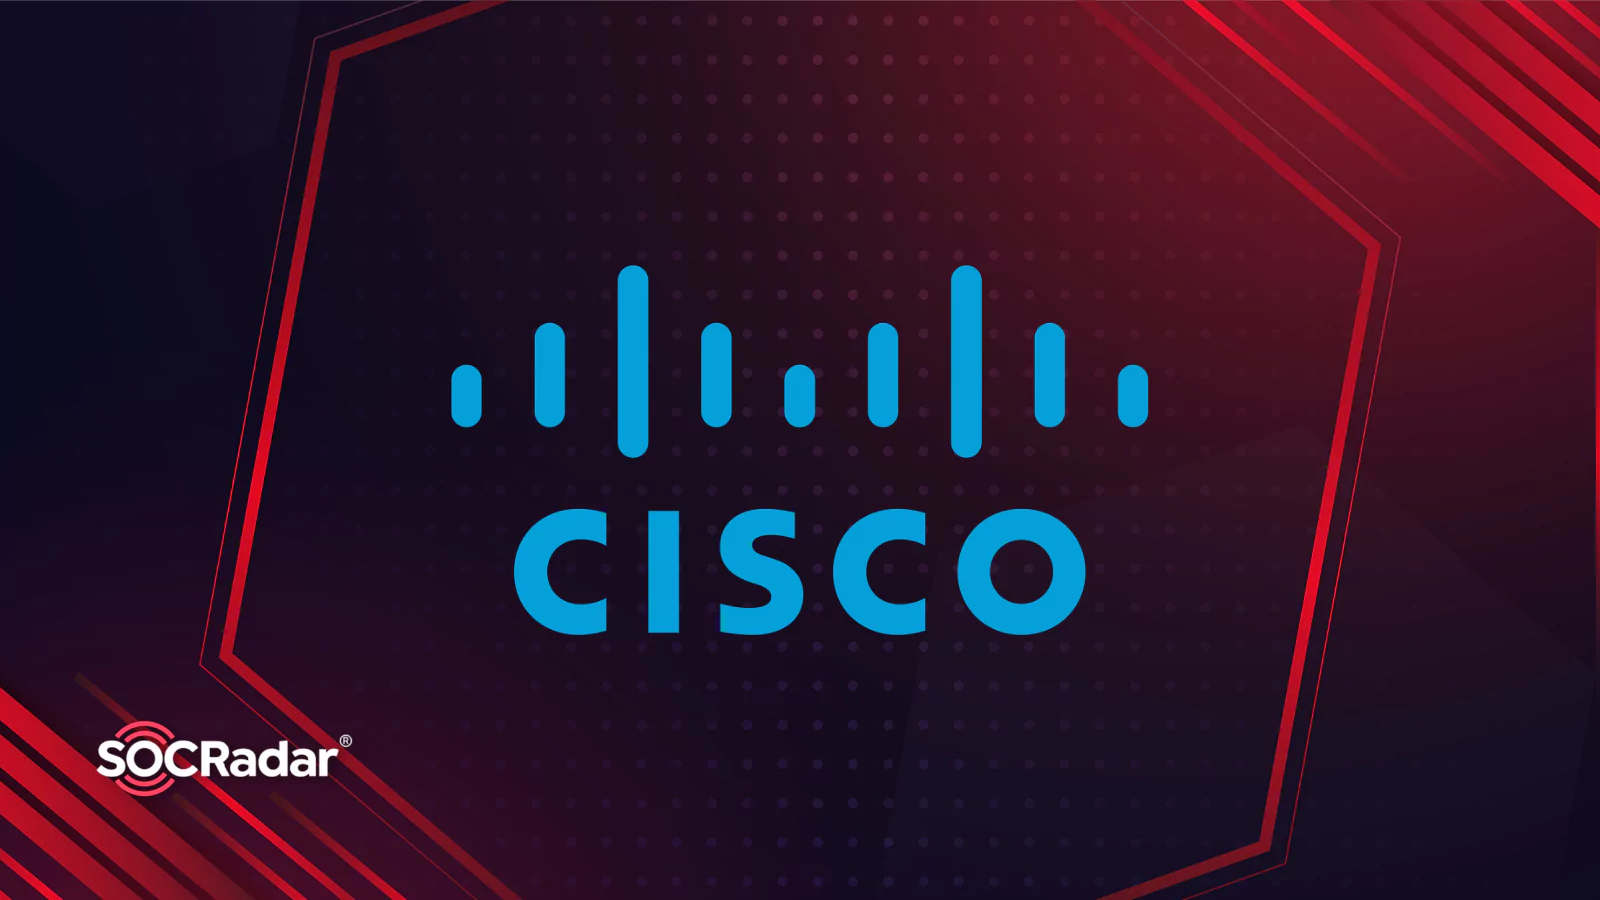 SOCRadar® Cyber Intelligence Inc. | Cisco Releases Patches for Vulnerabilities in Multiple Products